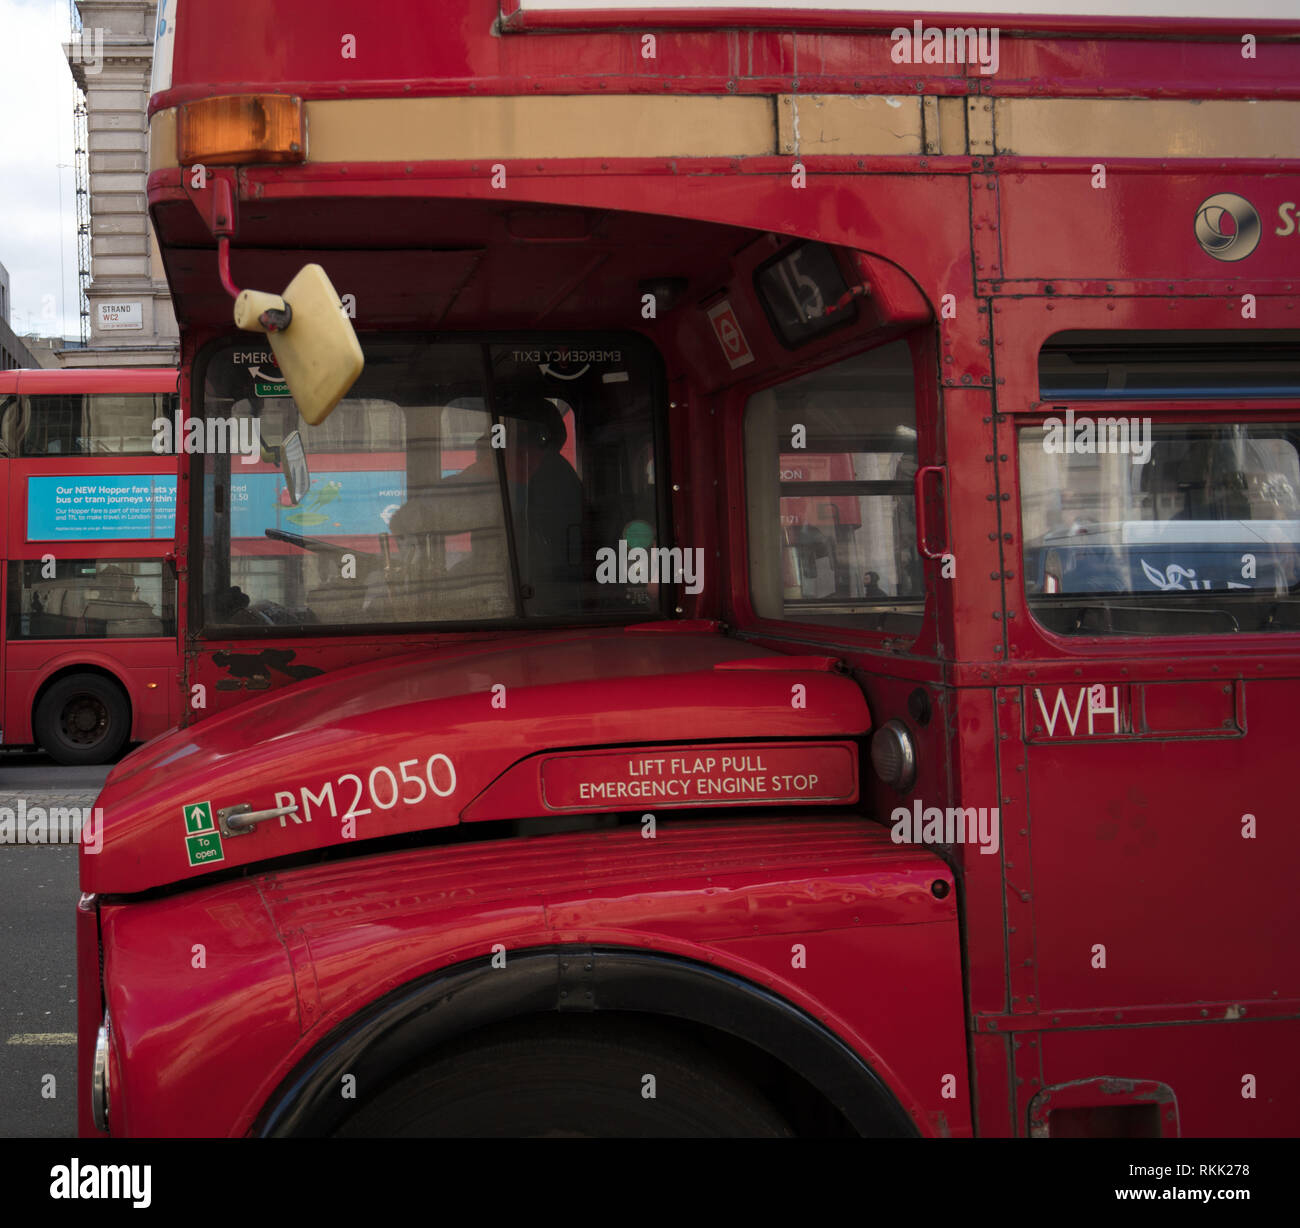 London, UK. 11th February 2019. Half cab design and front mounted engine of heritage Routemaster red bus, still operating daily until the 1st of March this year, when the bus will run only on weekends. Credit: Joe Kuis / Alamy Live News Stock Photo